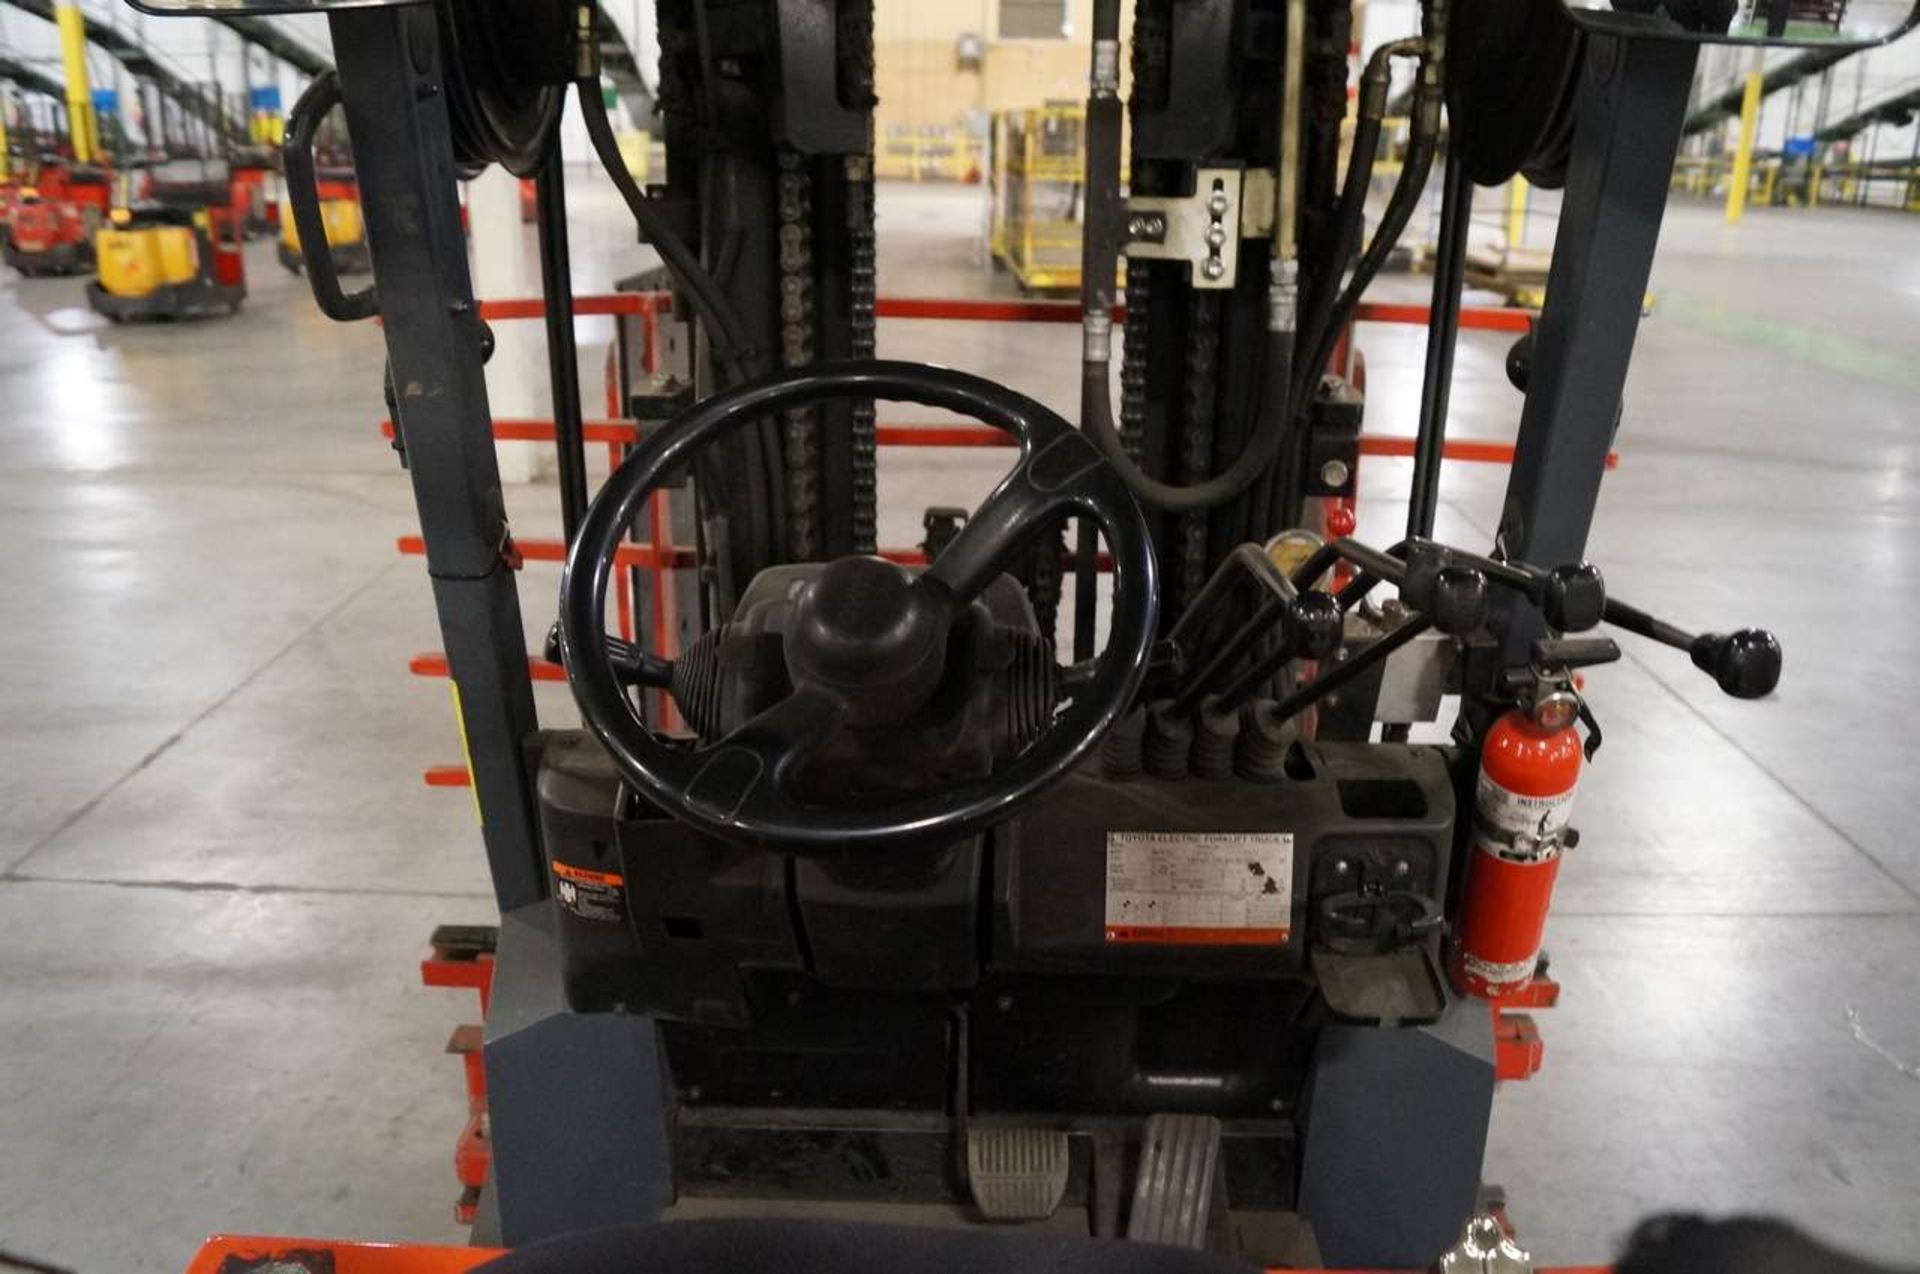 2007 TOYOTA 7FBCU25 Electric Counterbalance Sit Down - Image 5 of 5